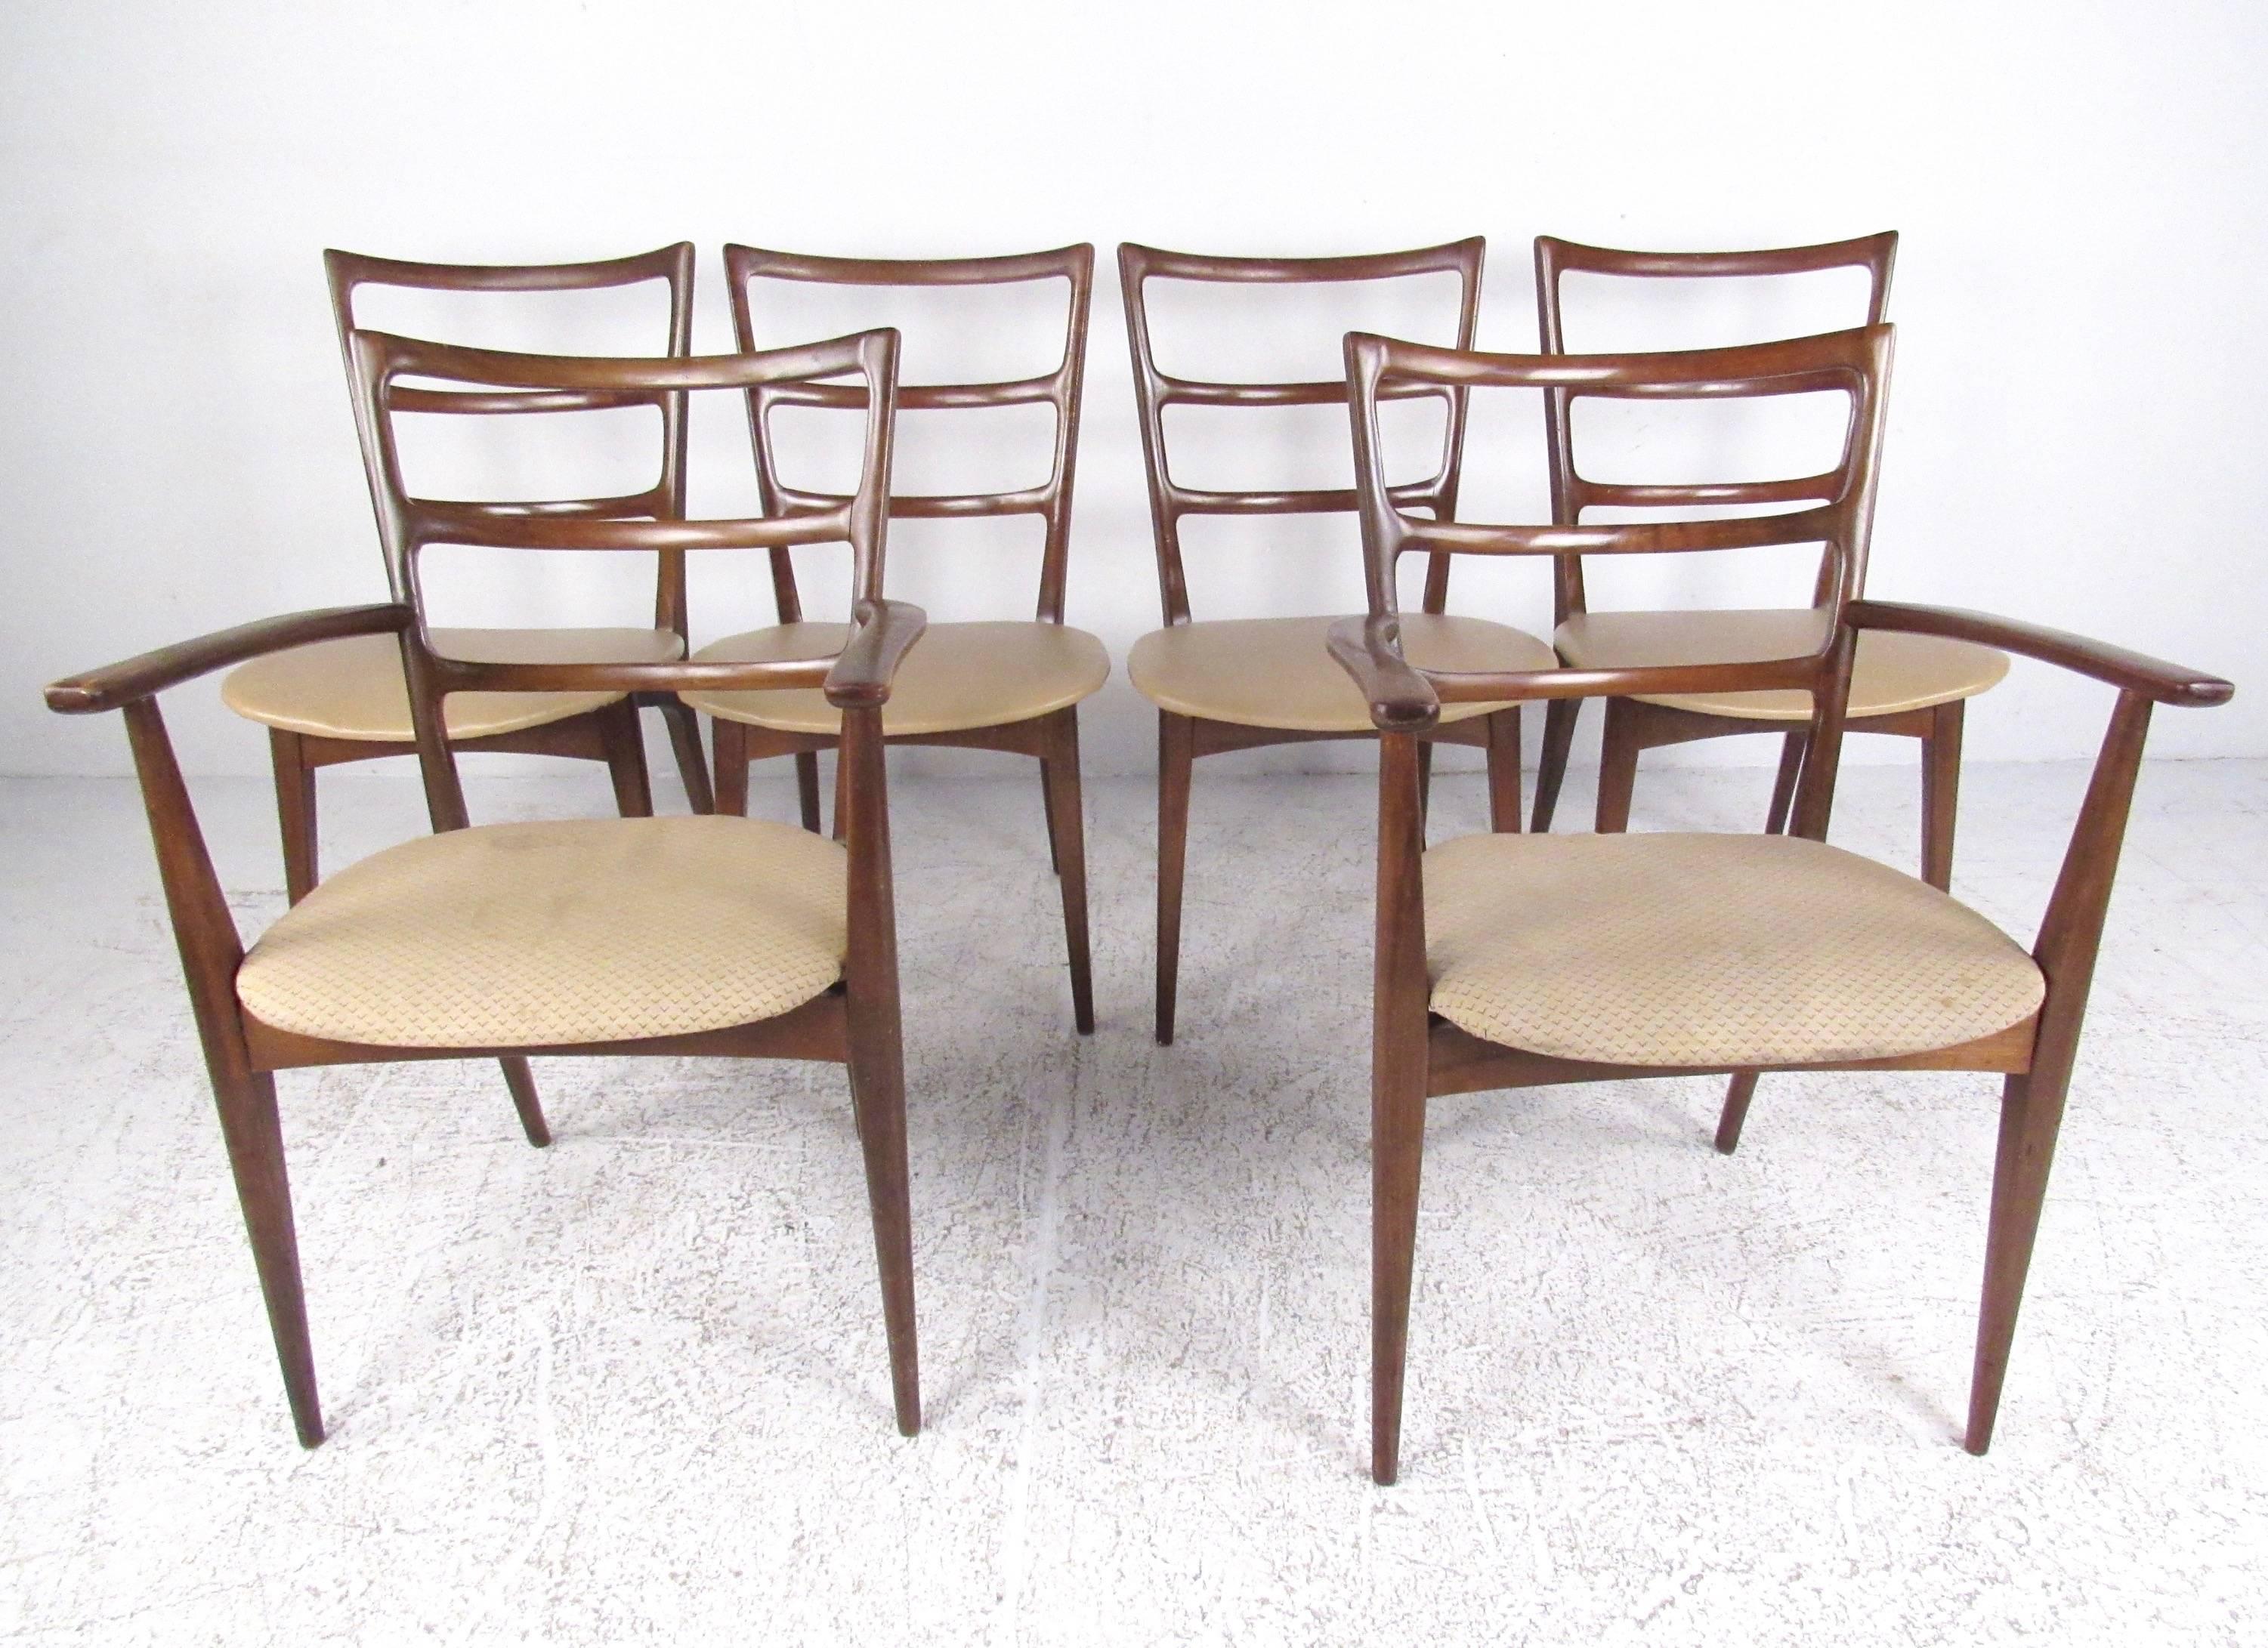 This stylish set of vintage modern dining chairs includes two armchairs and four side chairs. Sculpted high back seats, and comfortable padded seats add to the versatility and charm of the set. The perfect mix of impeccable midcentury design and